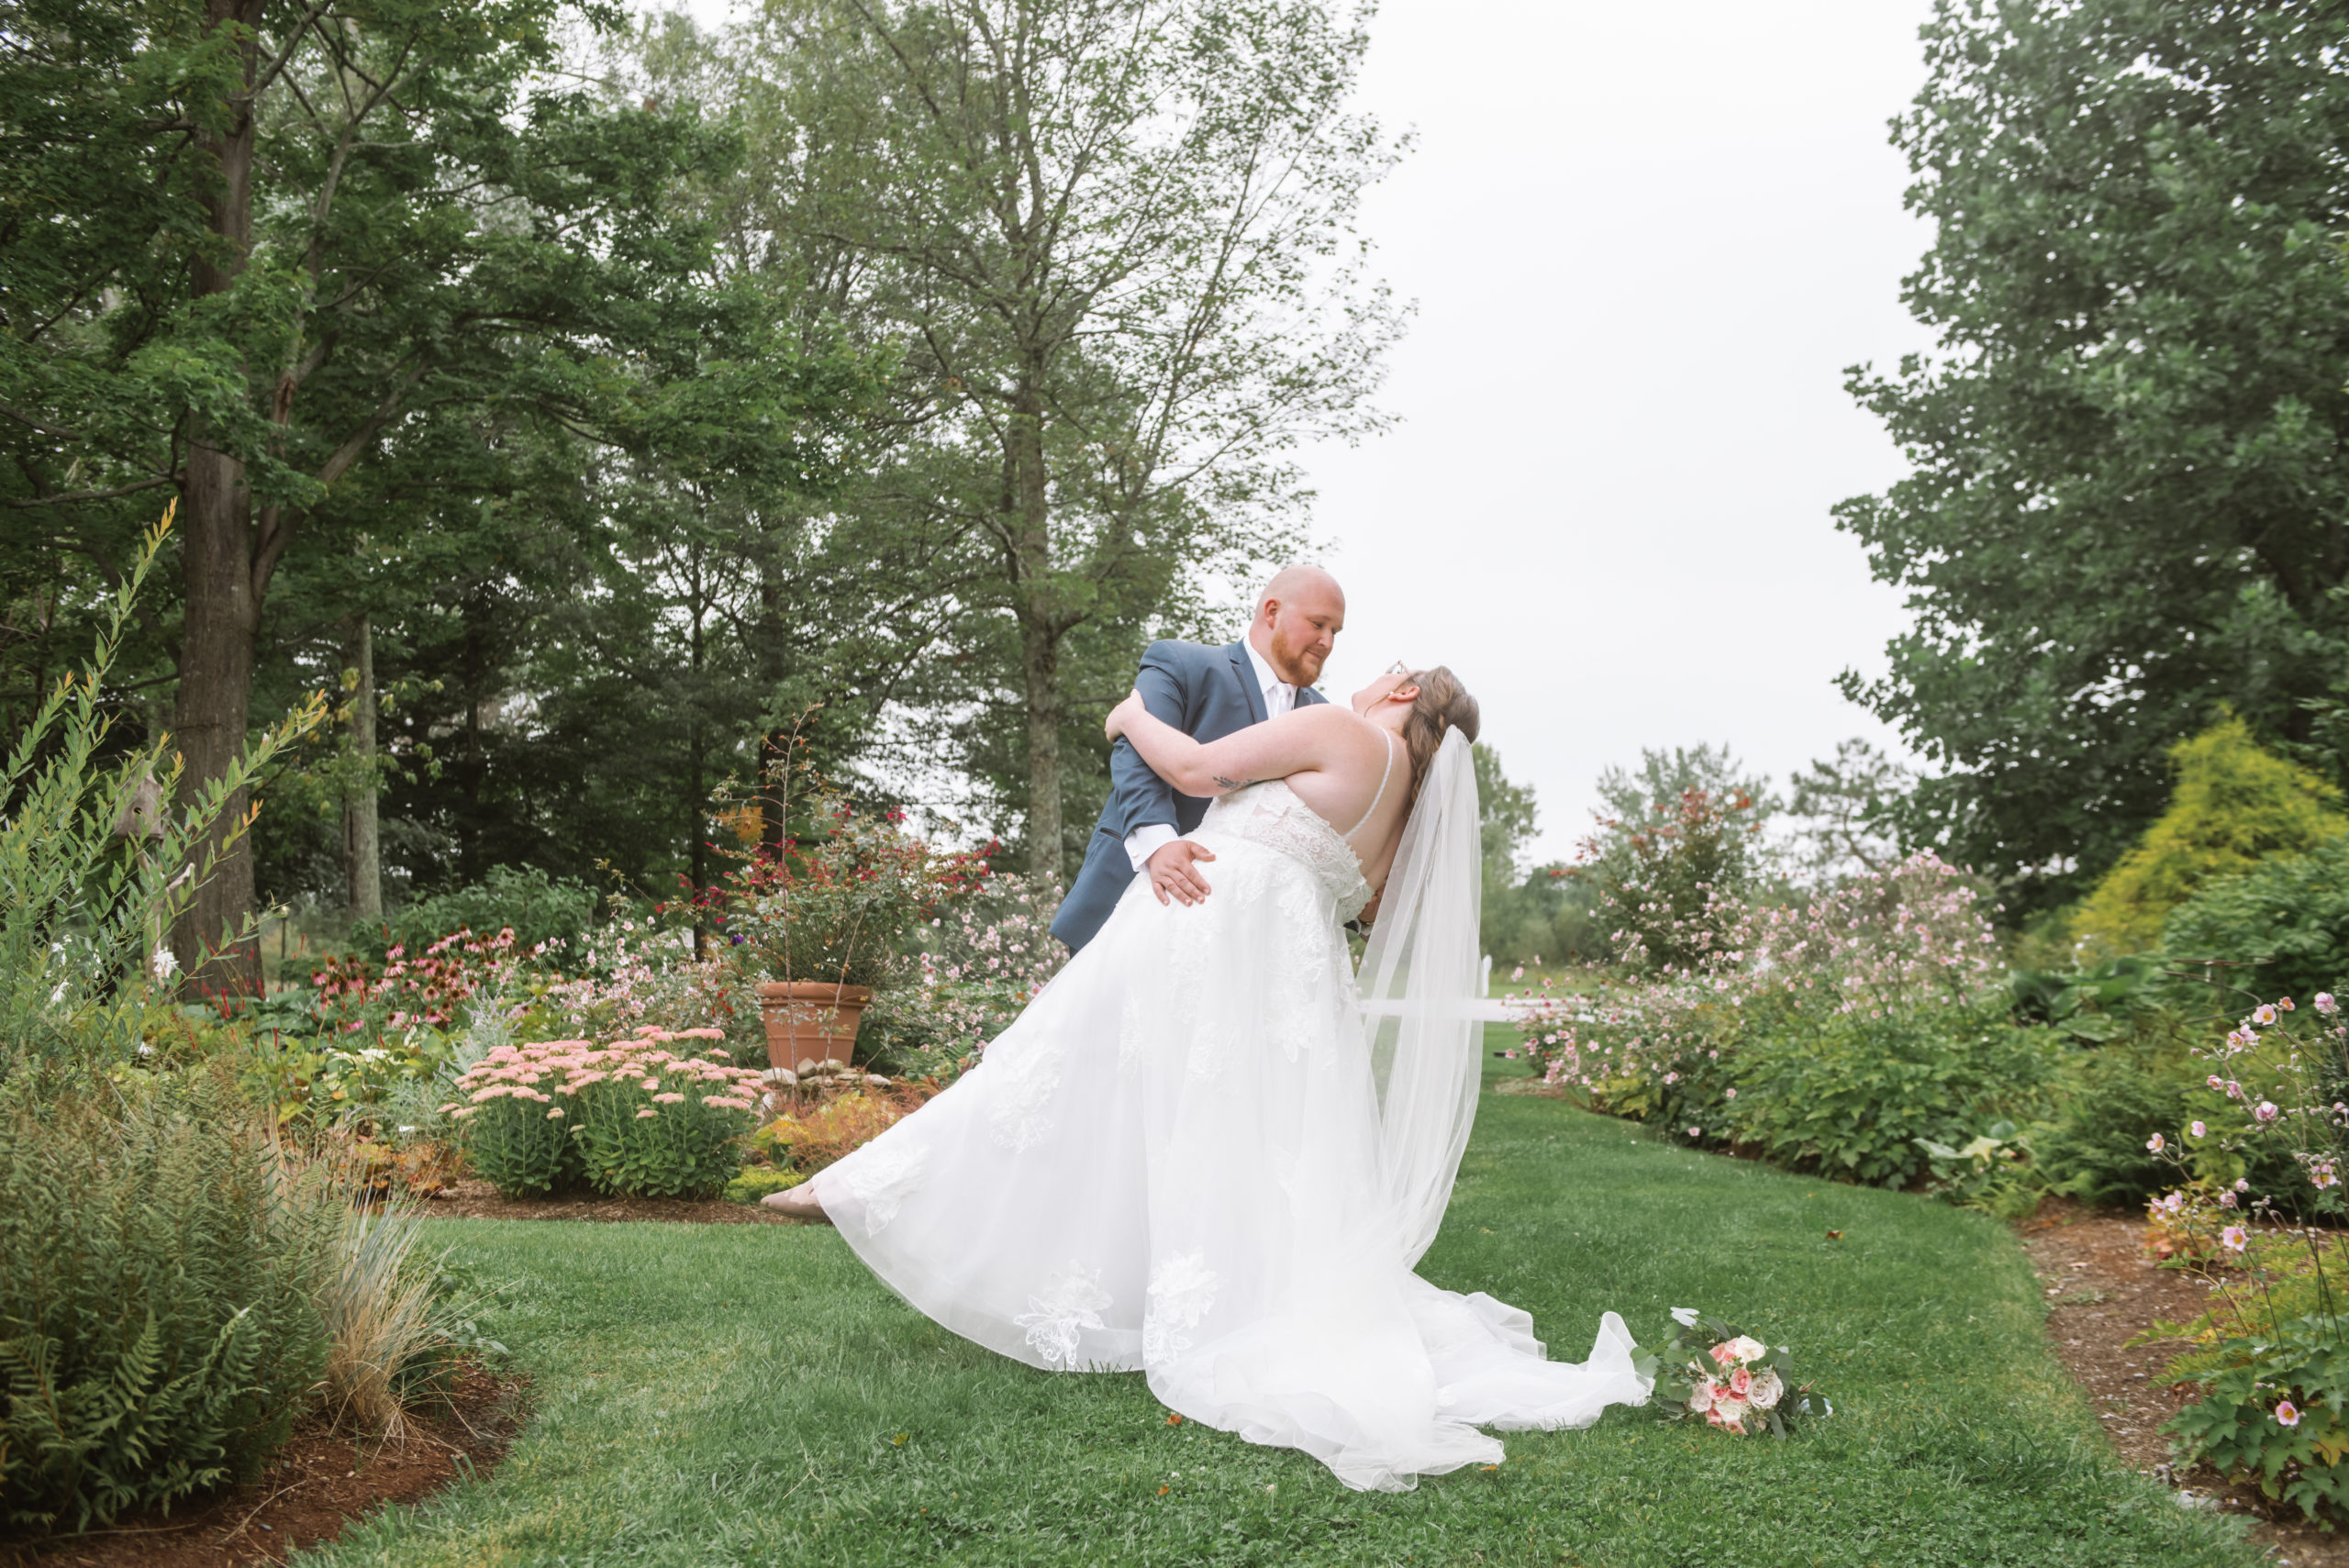 Groom dipping his bride romantically in a garden. Her bouquet is set to the behind her dress train and veil on the ground.  She is wearing a long white lace gown with a long veil and he is wearing a blue suit with a white tie. 